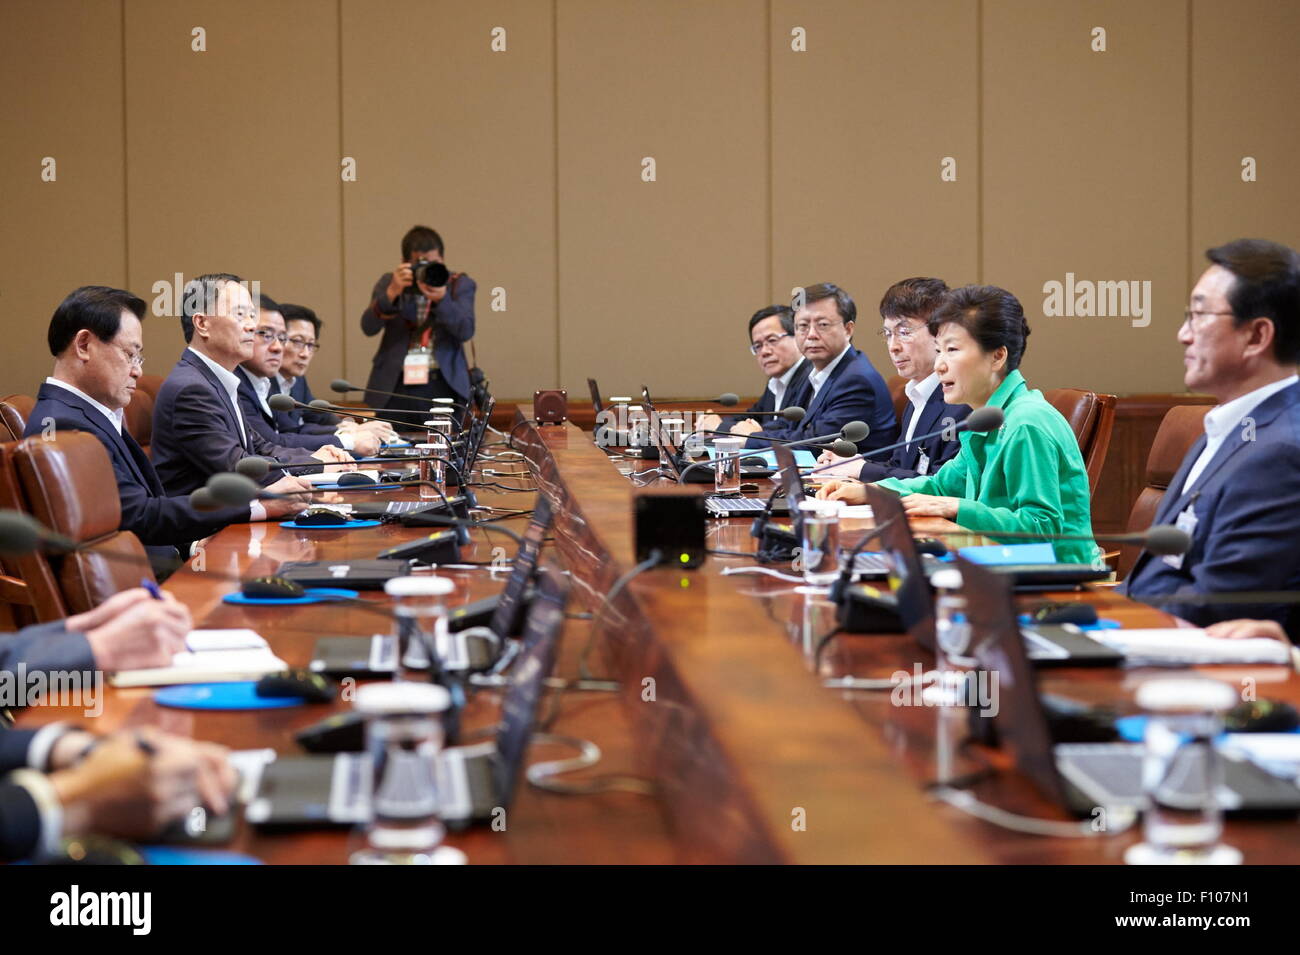 Seoul, South Korea. 24th Aug, 2015. South Korean President Park Geun-hye (2nd R) speaks during a meeting with senior presidential secretaries in Seoul, capital of South Korea, Aug. 24, 2015. South Korean President Park Geun-hye has demanded the Democratic People's Republic of Korea (DPRK) to apologize for alleged provocations as emergency contact between the two sides continues, the presidential office said Monday. © Xinhua Photo/Alamy Live News Stock Photo